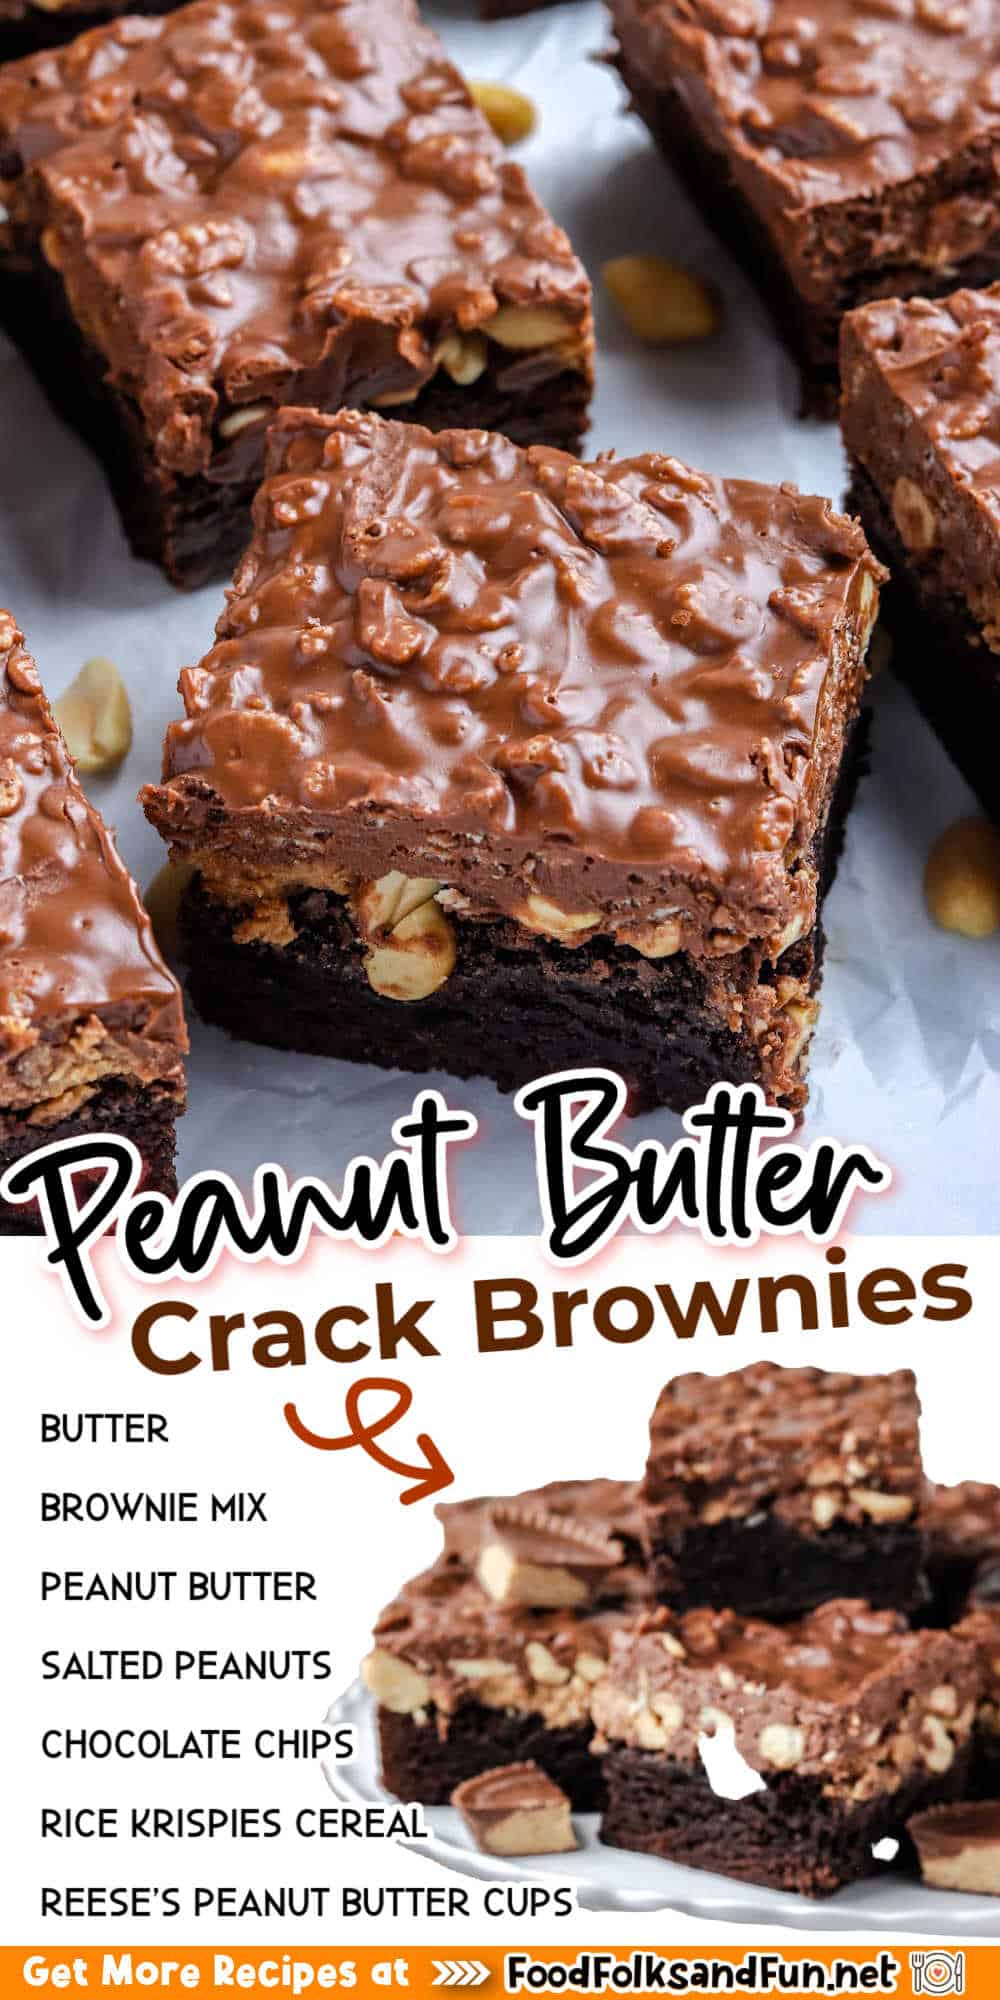 Satisfy your sweet tooth with these decadent Peanut Butter Cup Crunch Brownies! This easy recipe will be a hit with chocolate and PB lovers alike. via @foodfolksandfun